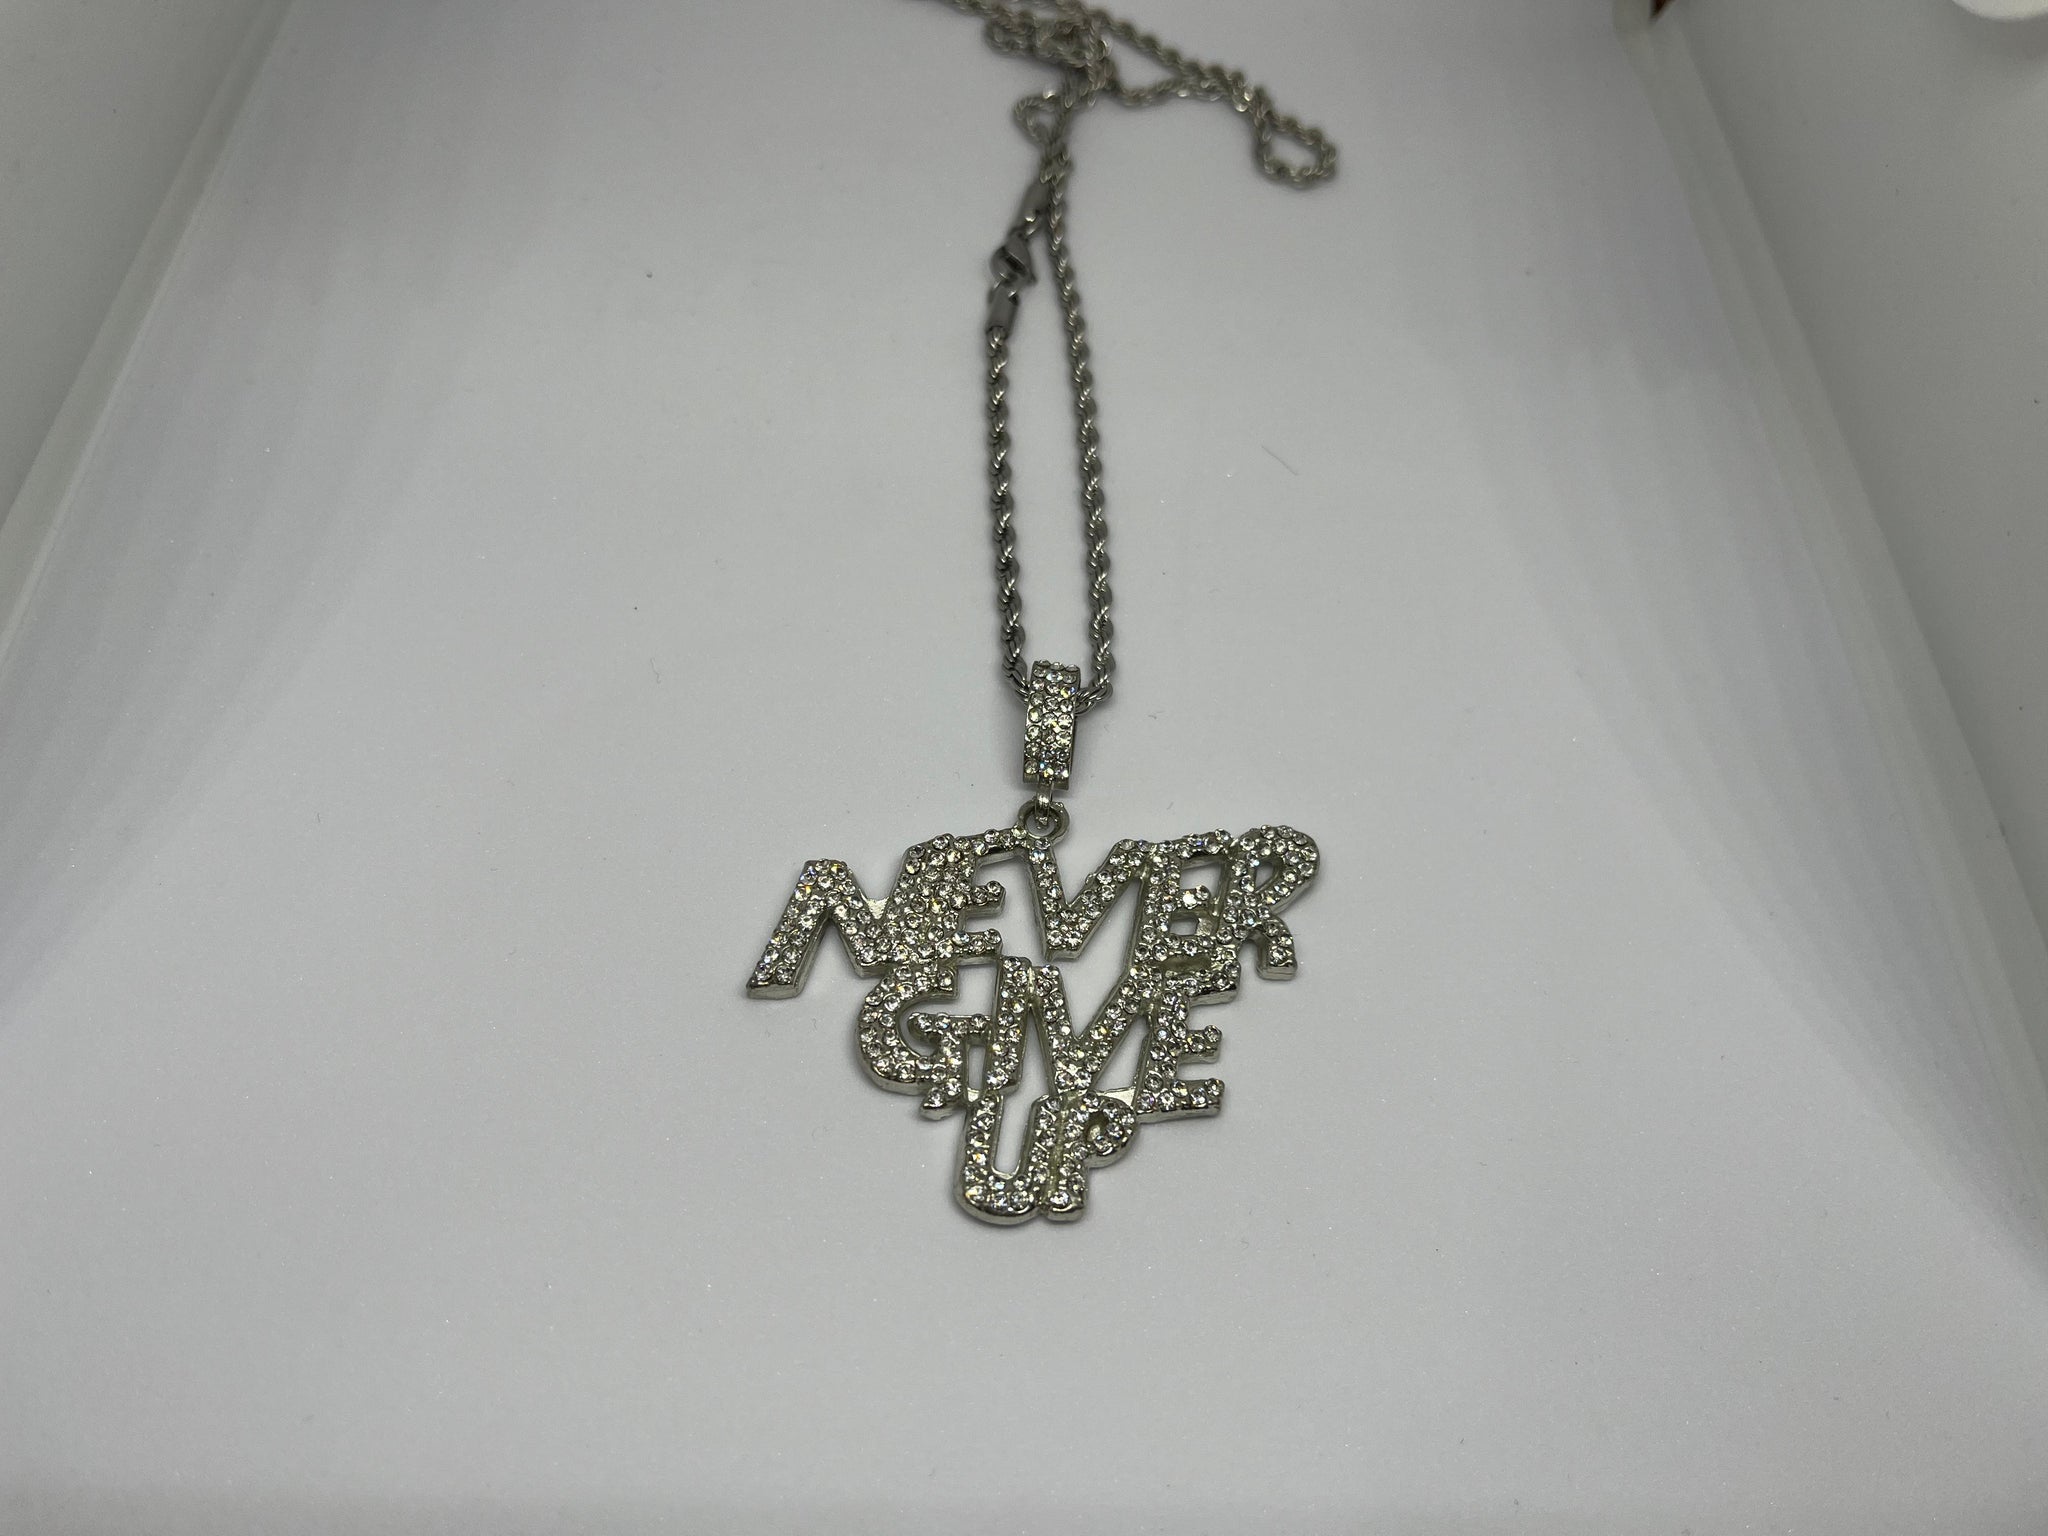 Never Give Up Pendant